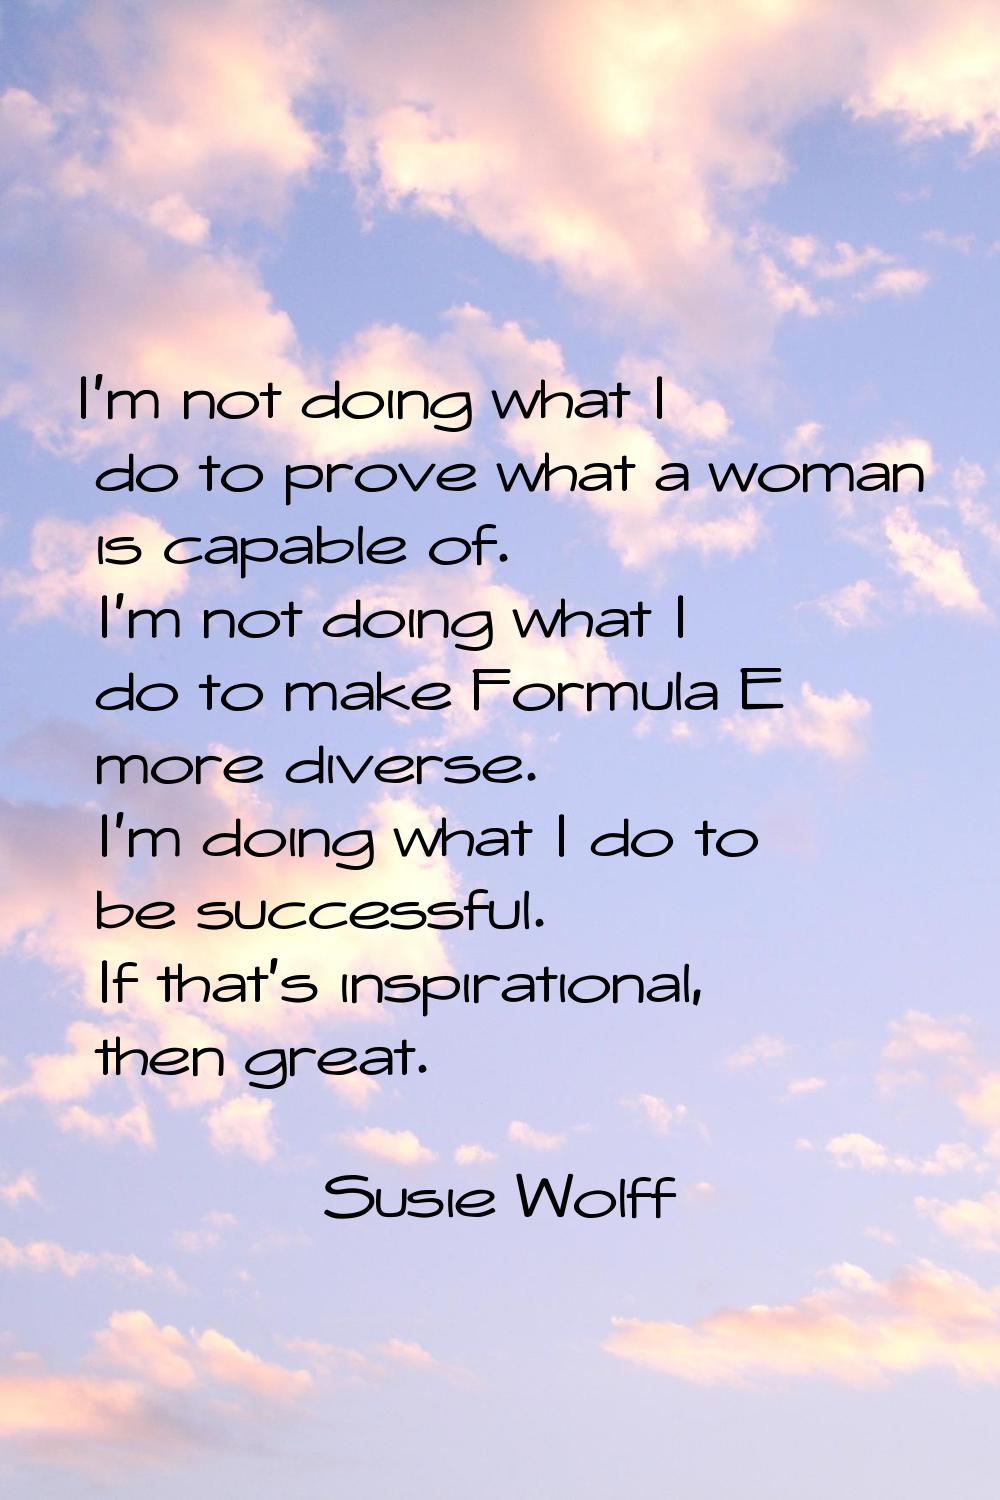 I'm not doing what I do to prove what a woman is capable of. I'm not doing what I do to make Formul